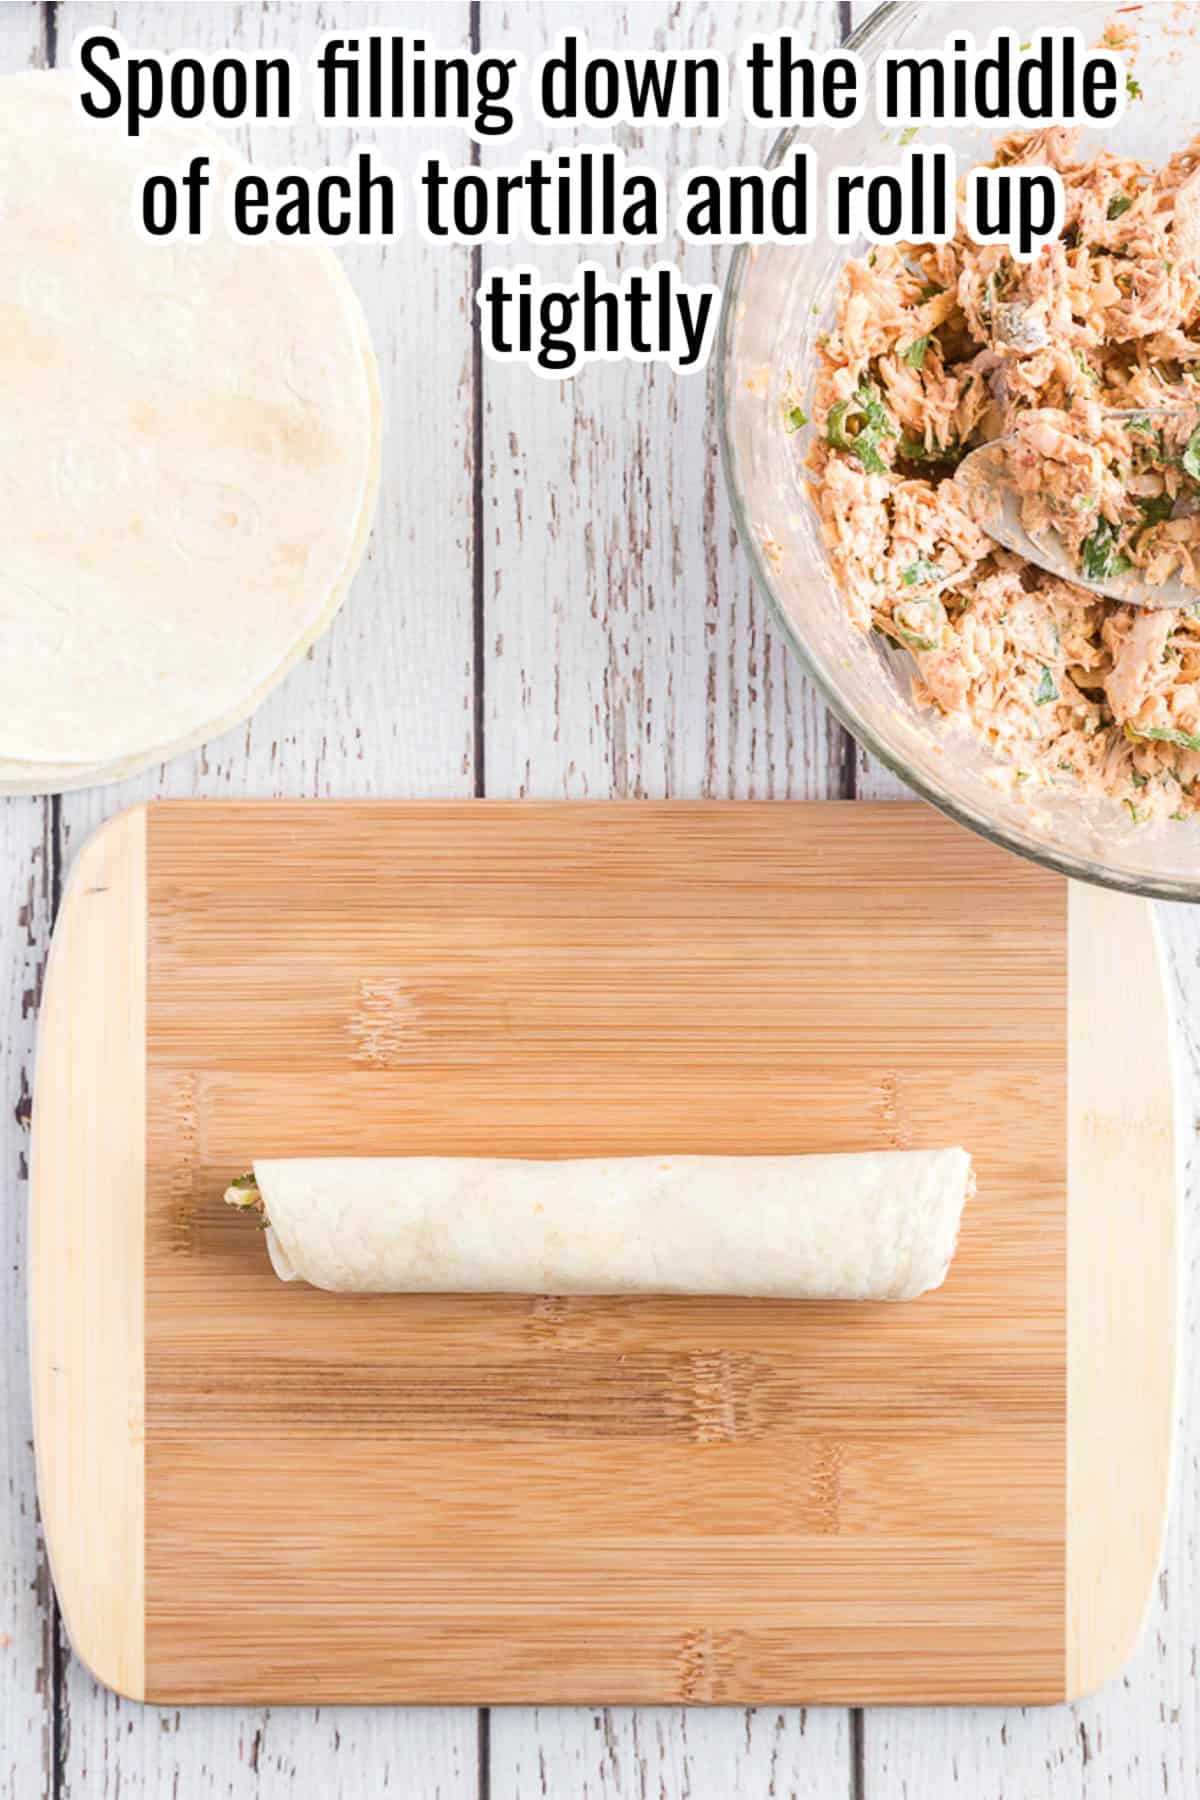 step by step making a taquito - rolling the tortilla.